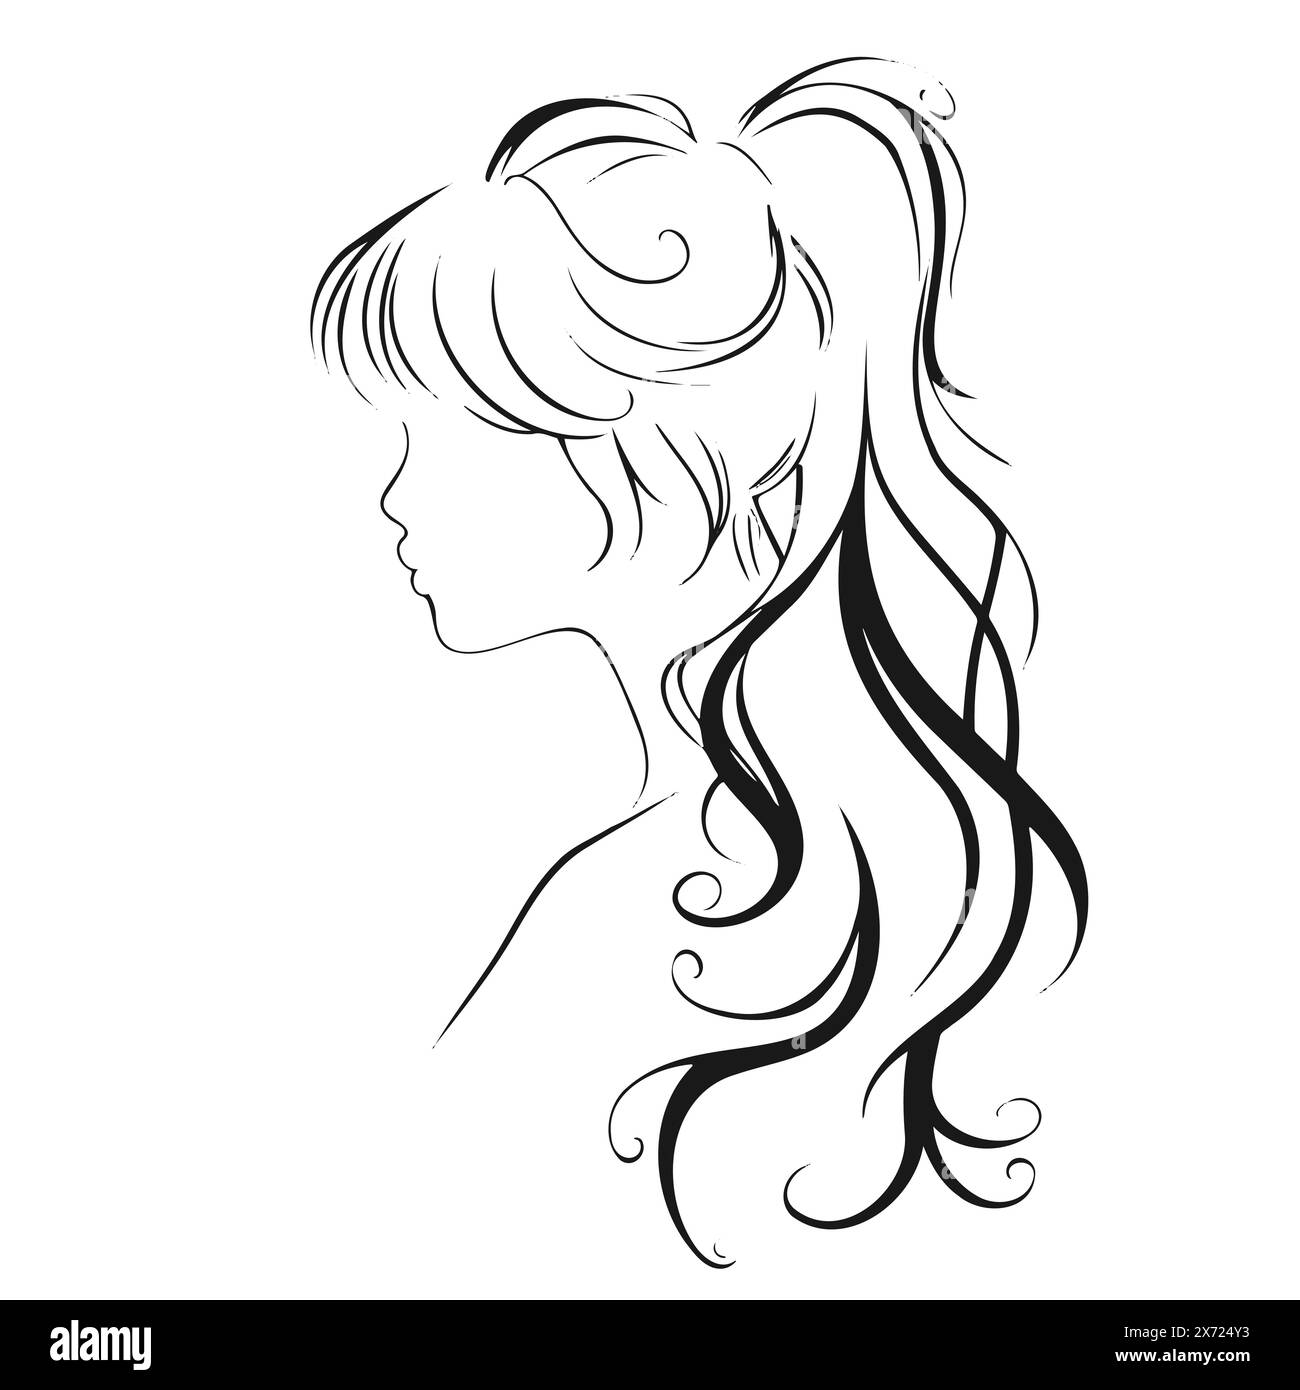 Monochrome illustration of a woman with flowing hair Stock Vector